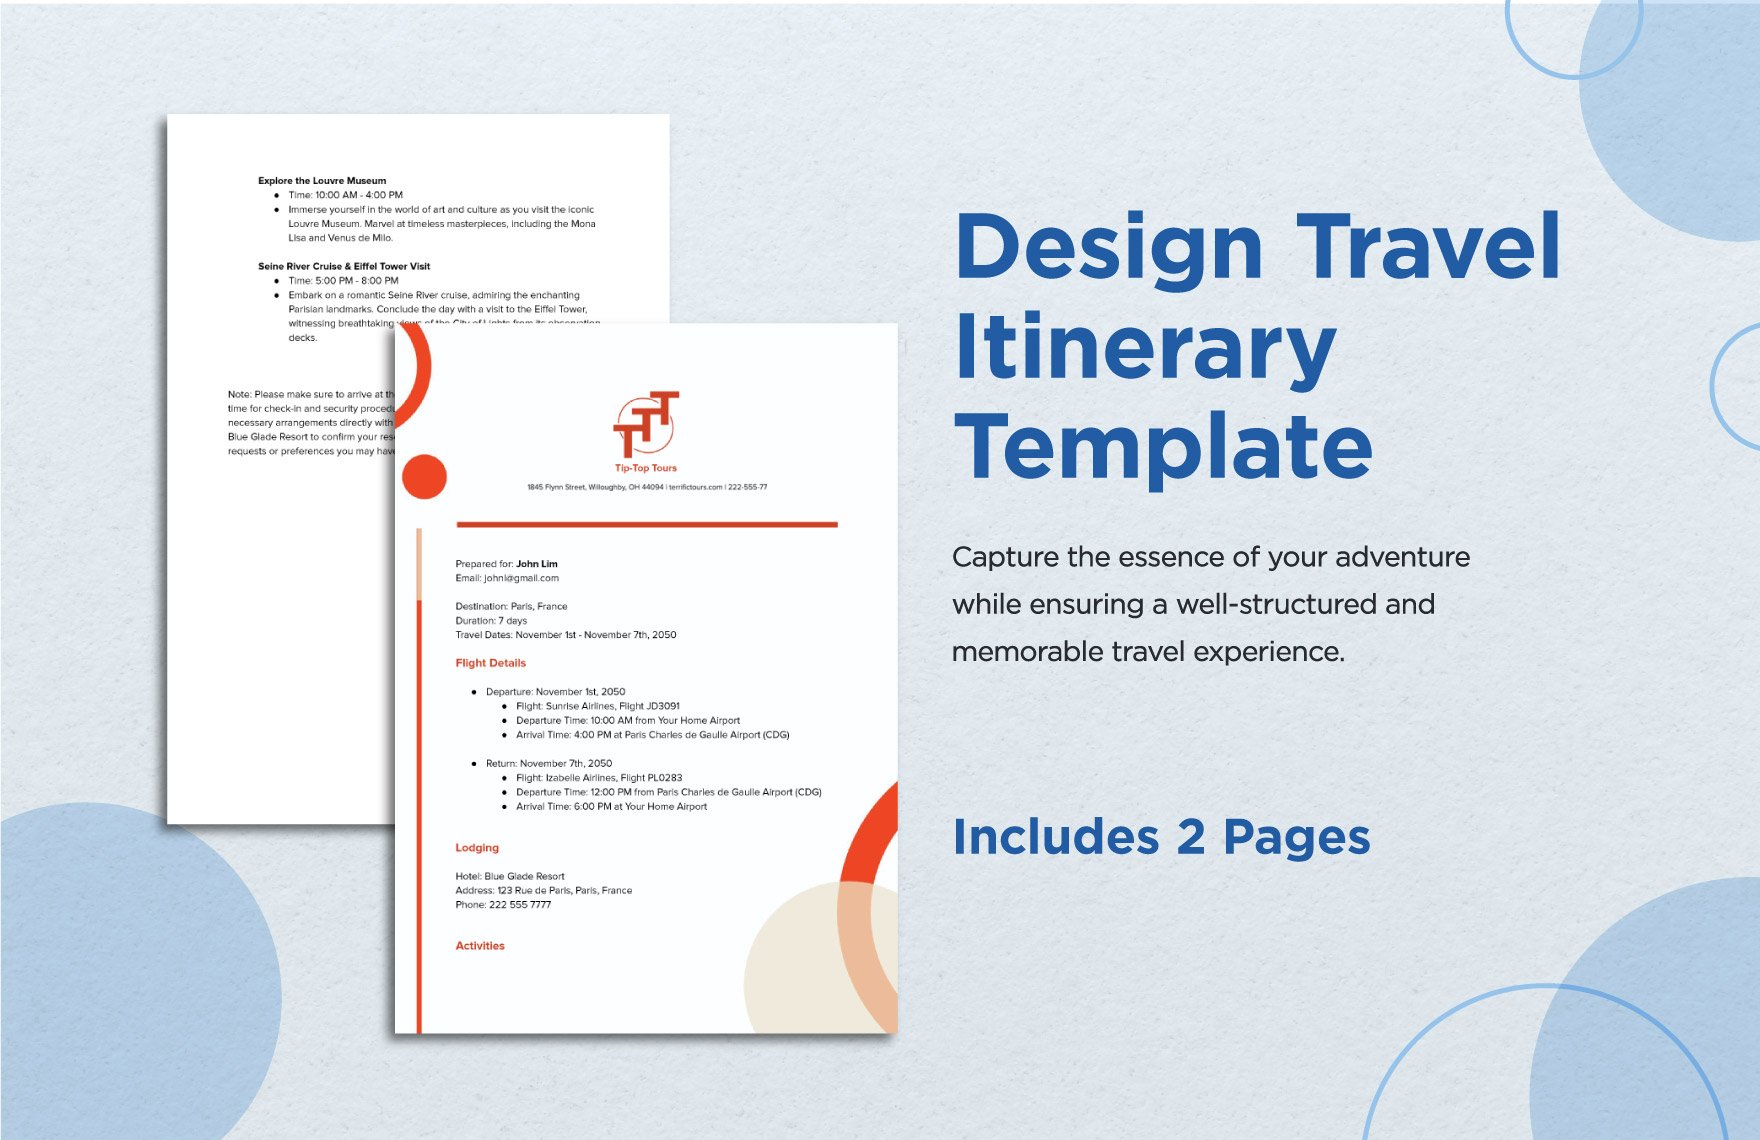 Design Travel Itinerary Template